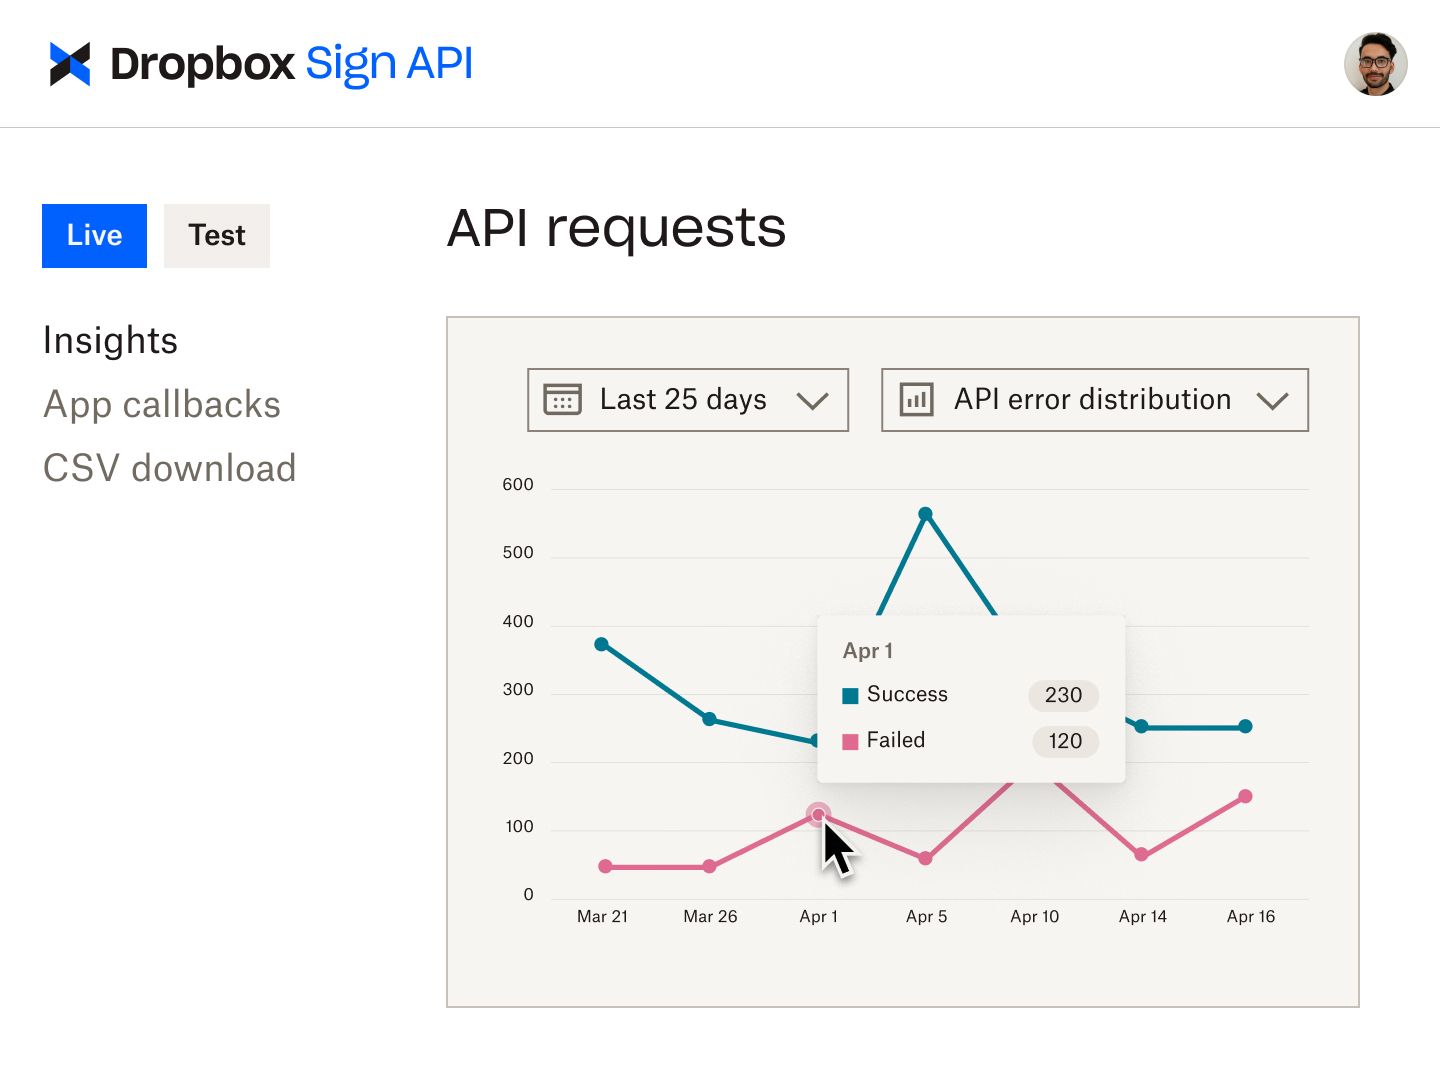 Dropbox Sign API dashboard with graphs showing API requests over time